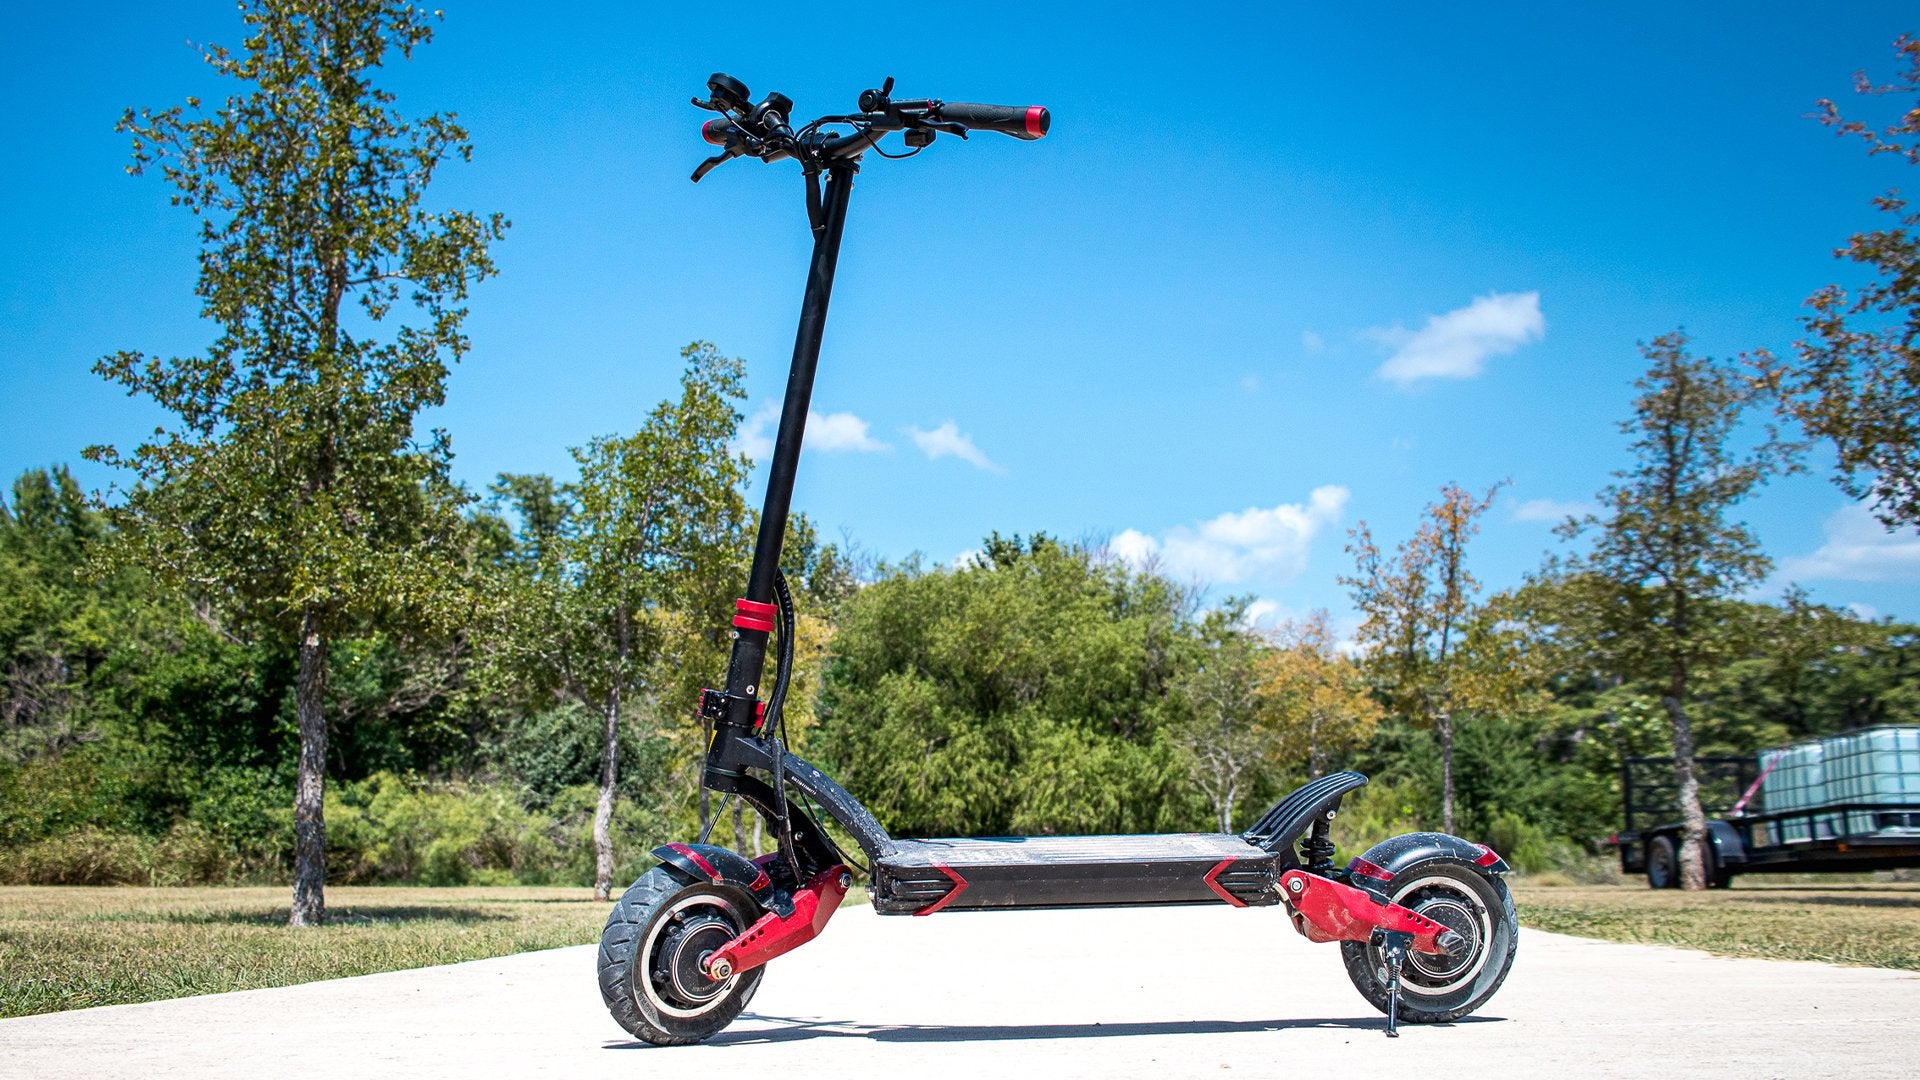 Top 8 Popular Uses for an Electric Scooter | Varla Scooter